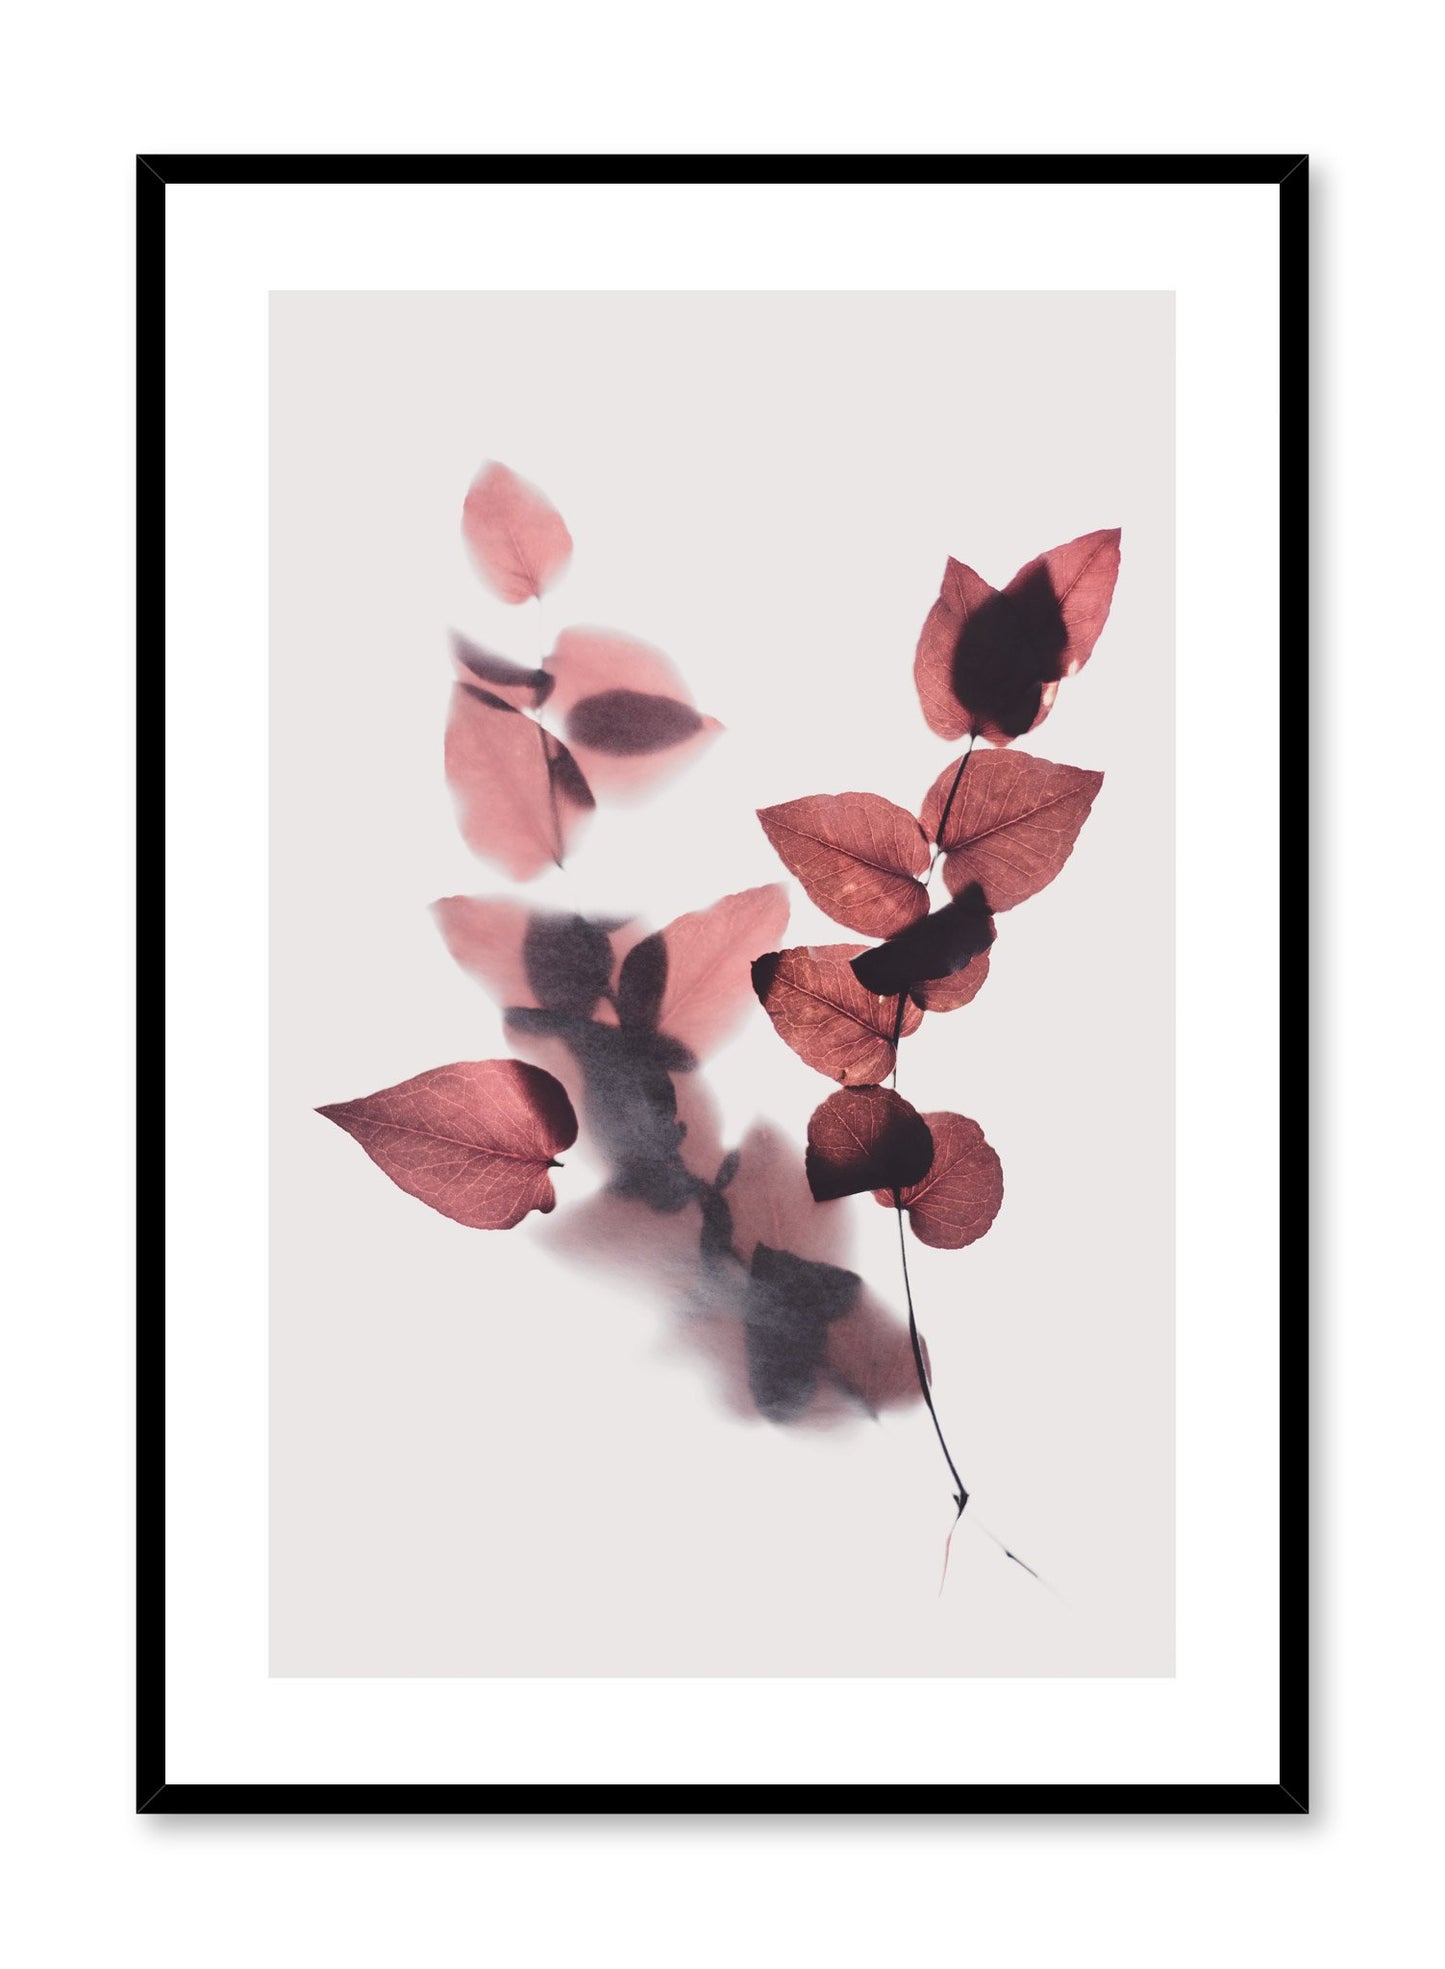 Modern minimalist botanical photography print by Opposite Wall with Leaves in Merlot